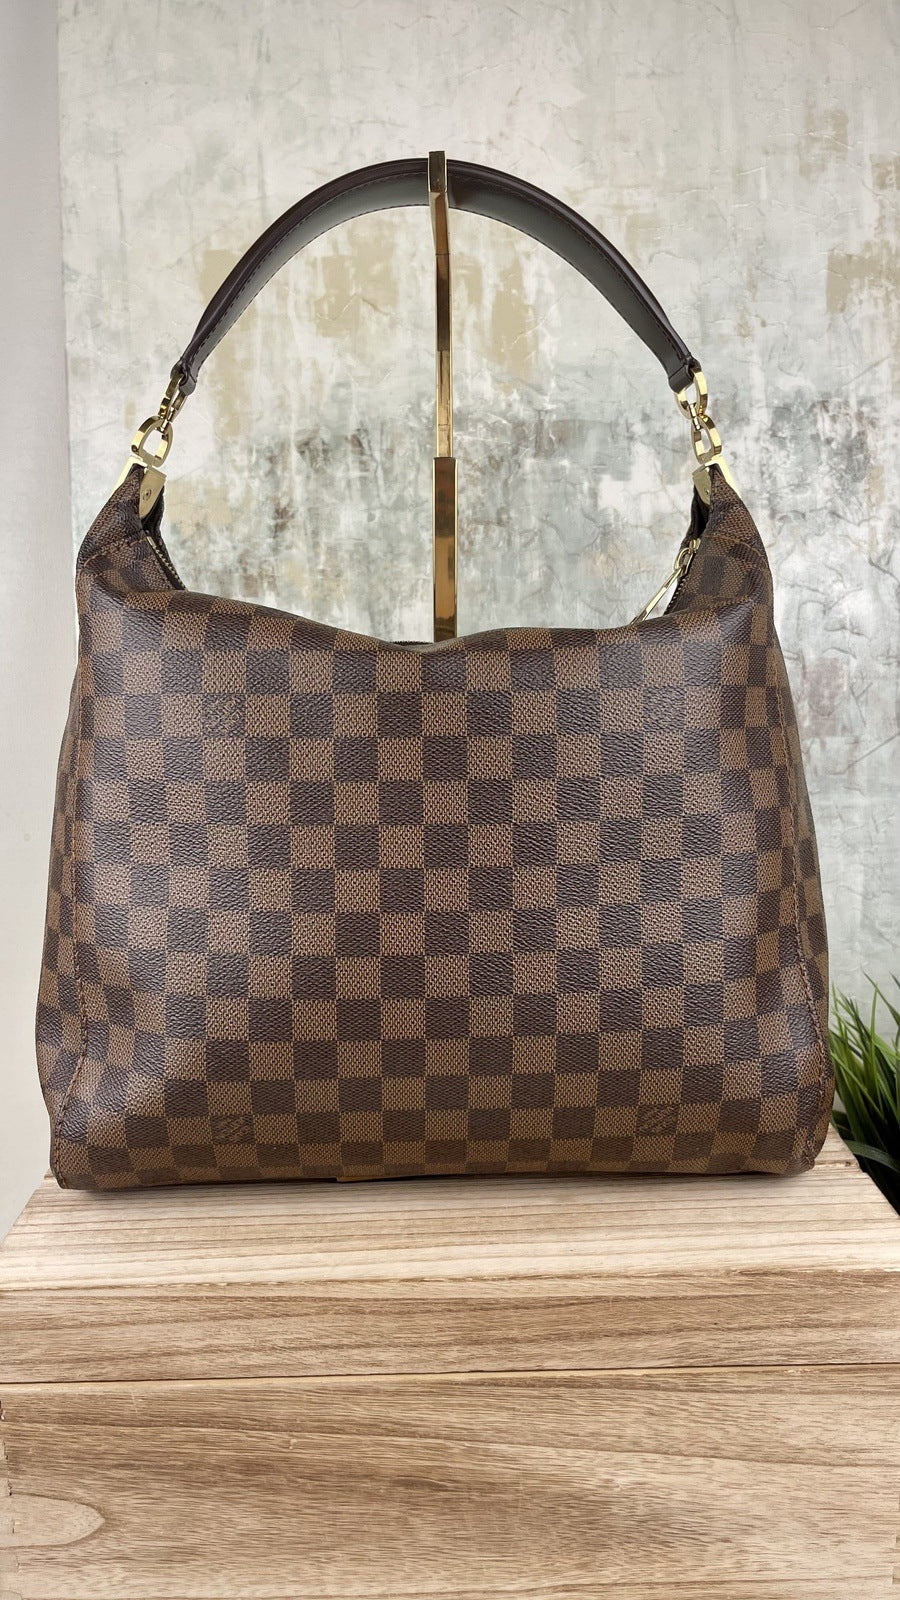 Authentic Louis Vuitton Neverfull GM-rev on Mercari  Louis vuitton  handbags crossbody, Louis vuitton handbags black, Louis vuitton handbags